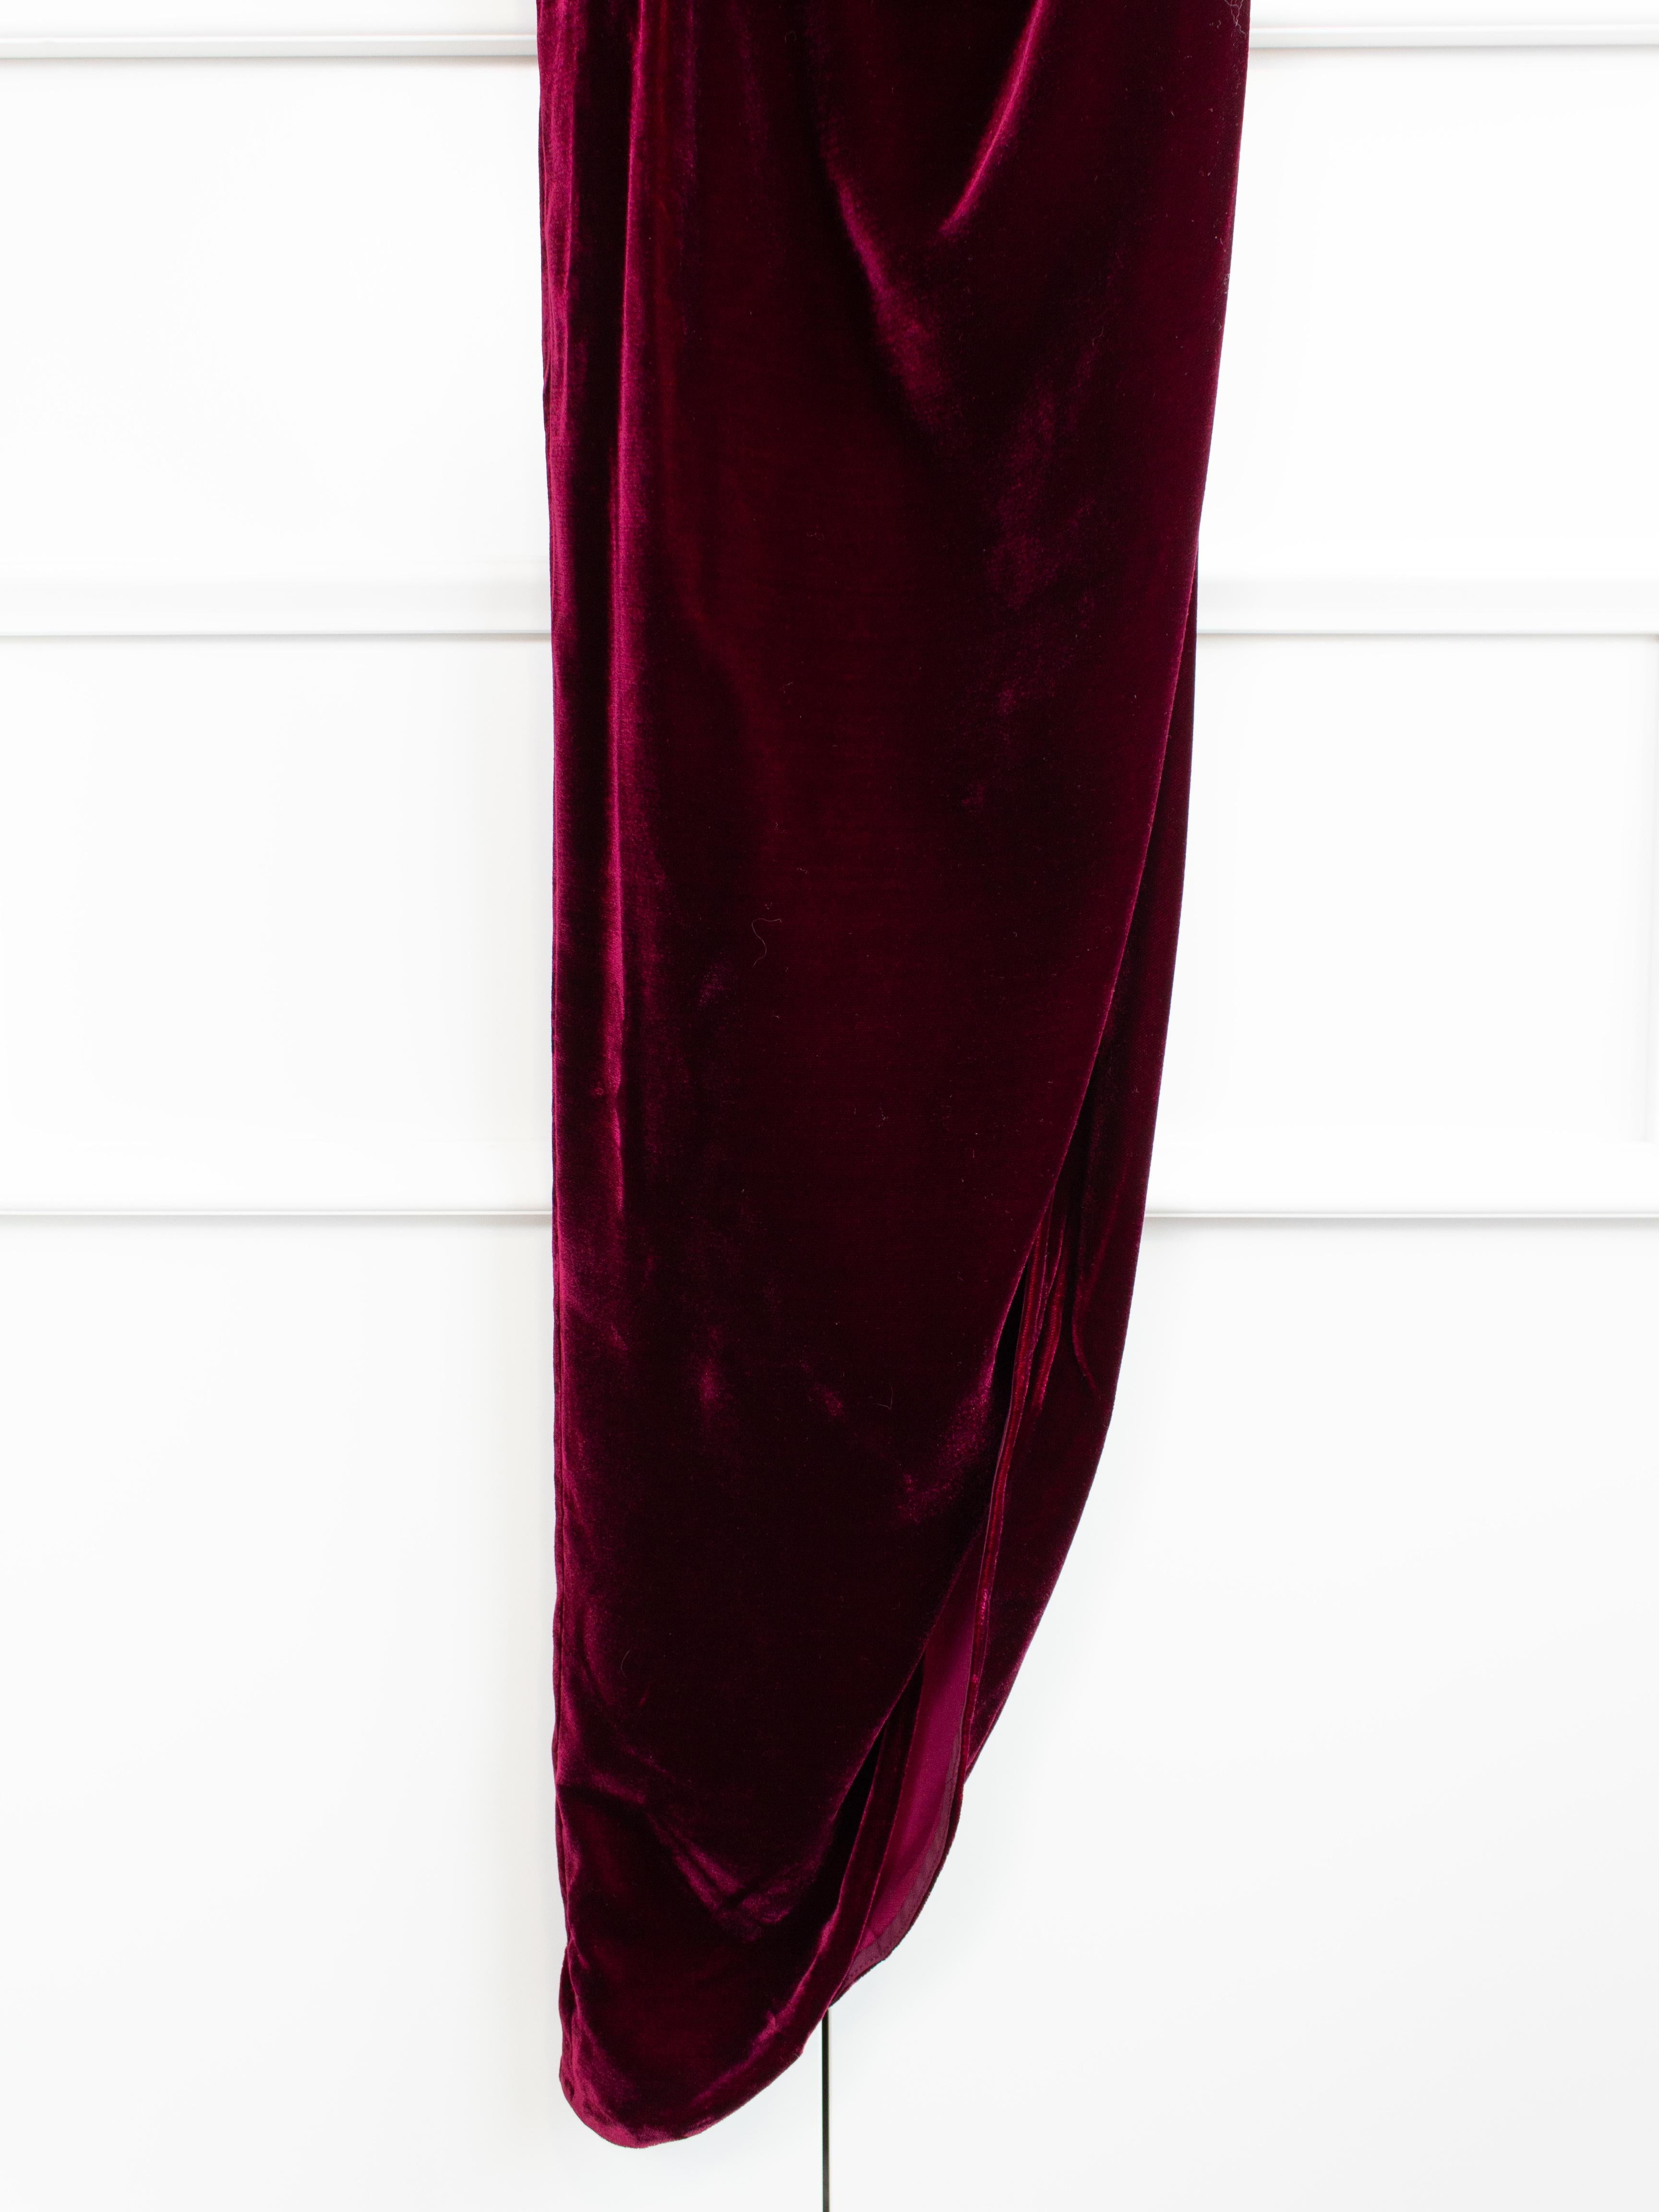 $6500 Ralph&Russo Red Carpet Lady Gaga Wine Red Burgundy Belted Velvet Ava Gown 9